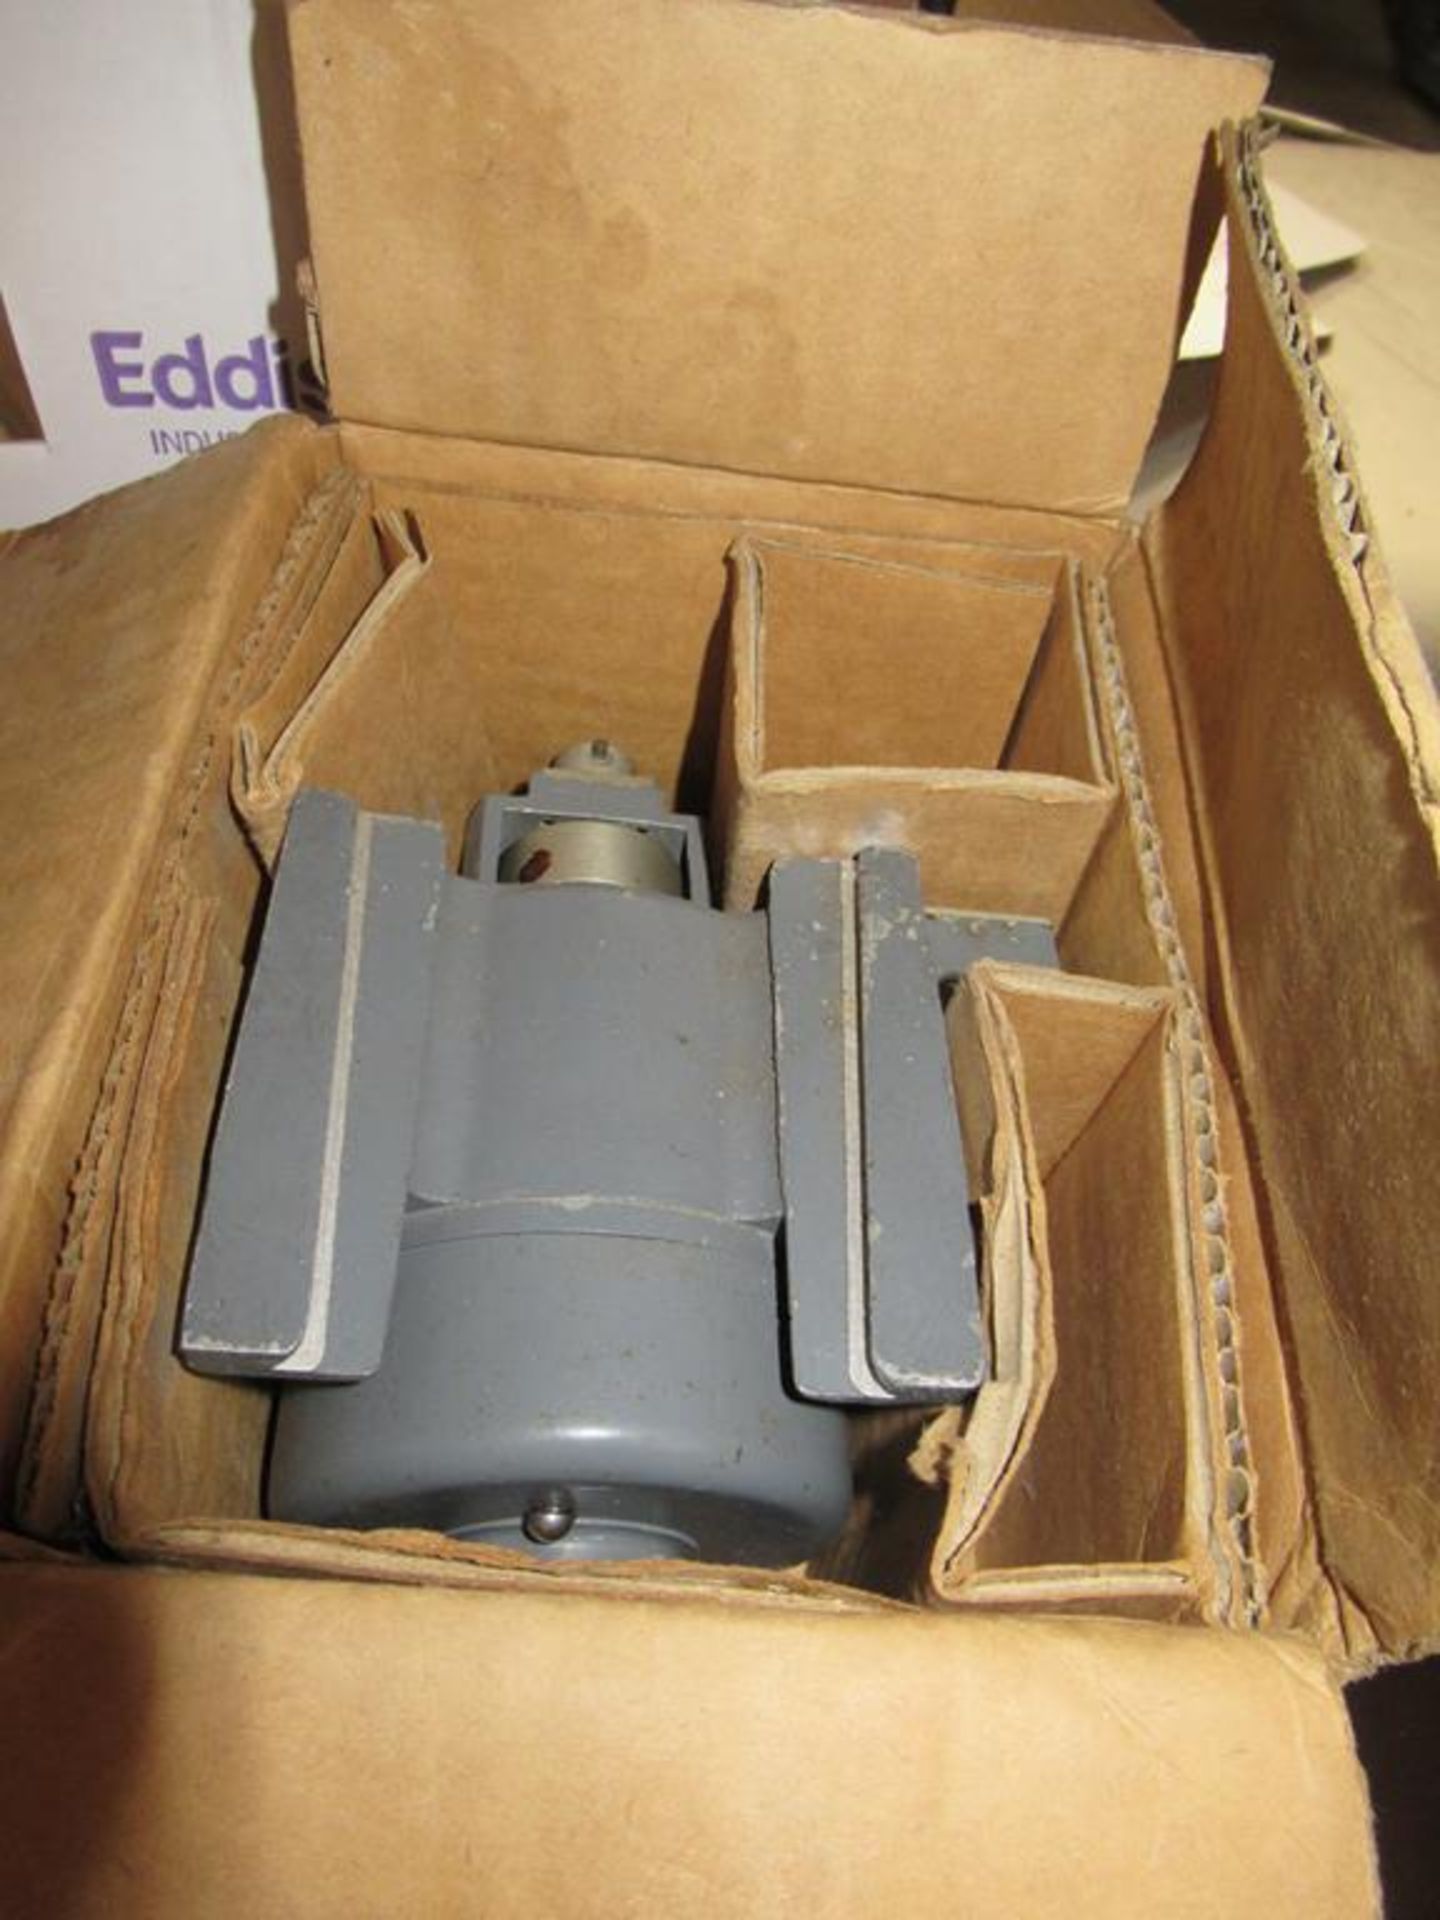 2 x 14A/988 Motor Units for F52, F8 or F24 Arial Reconnaissance Cameras - Image 2 of 2